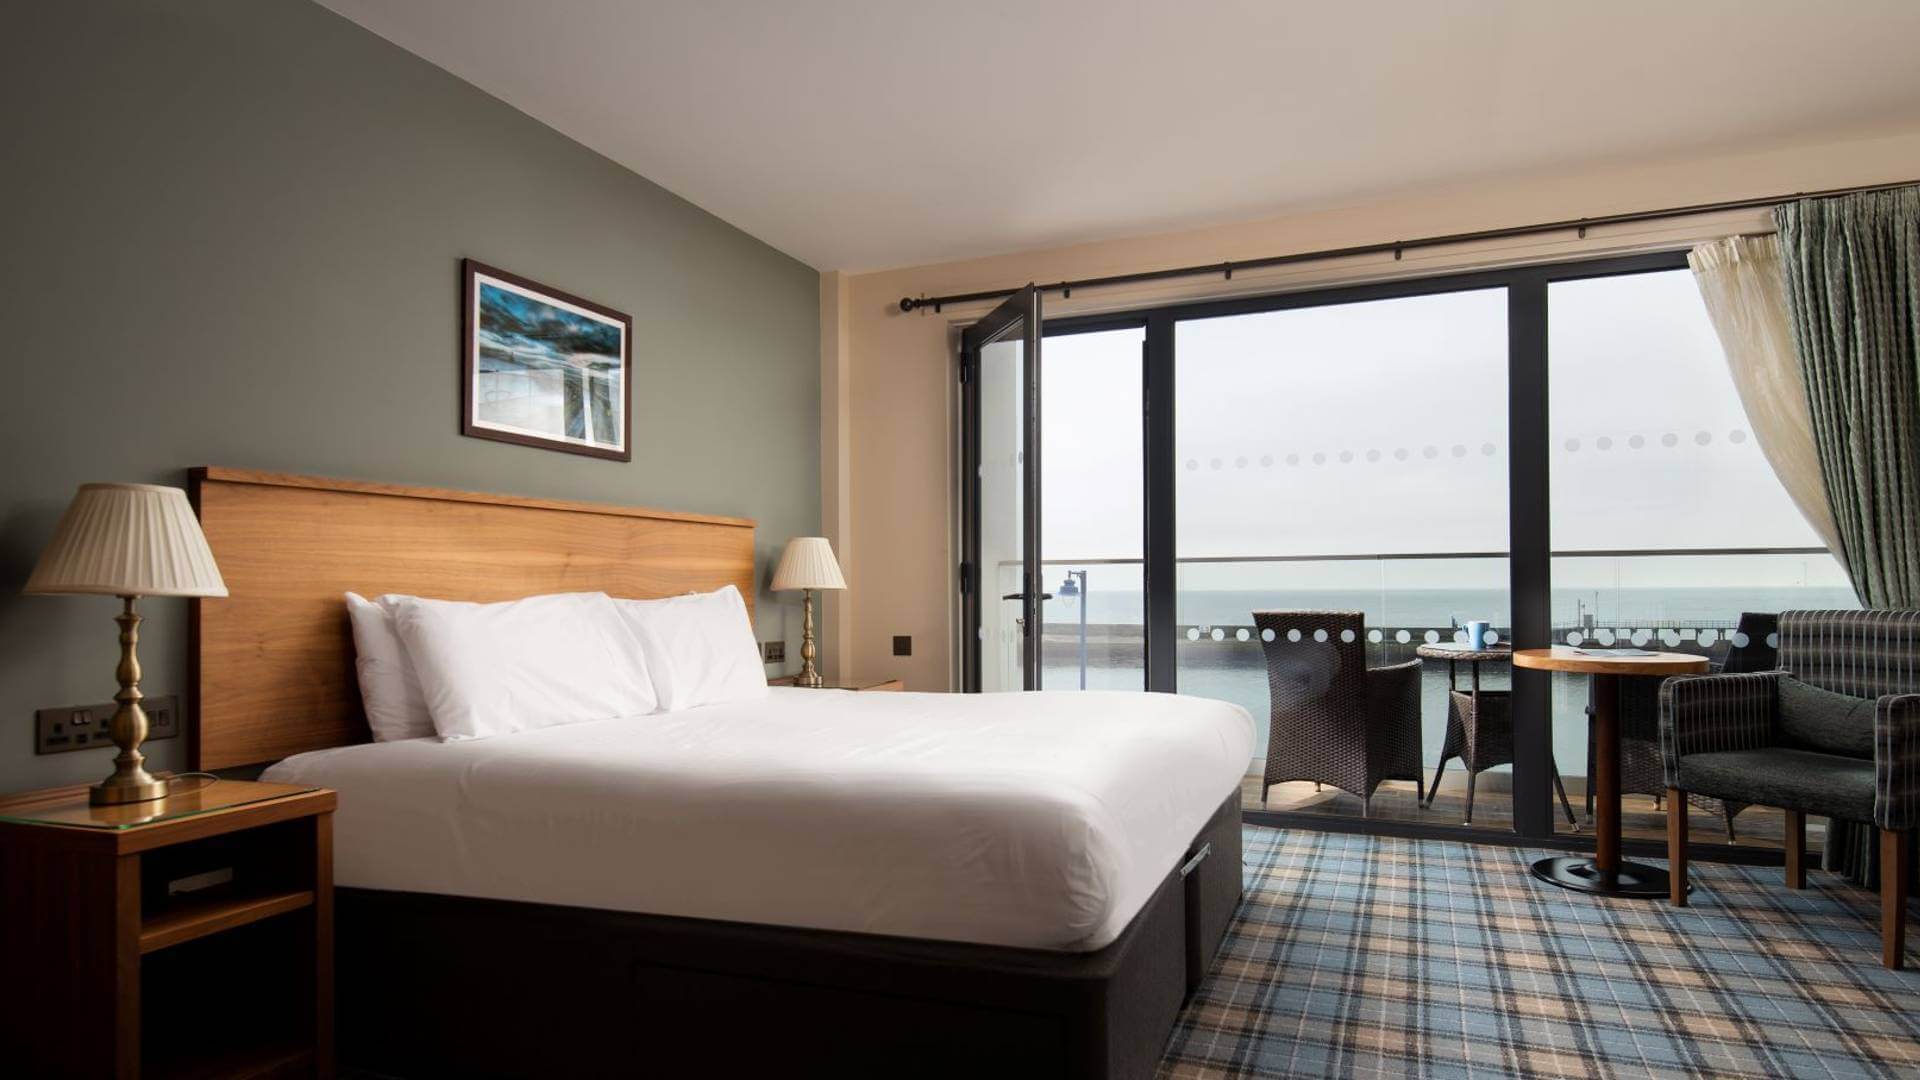 A premier sea view room with balcony